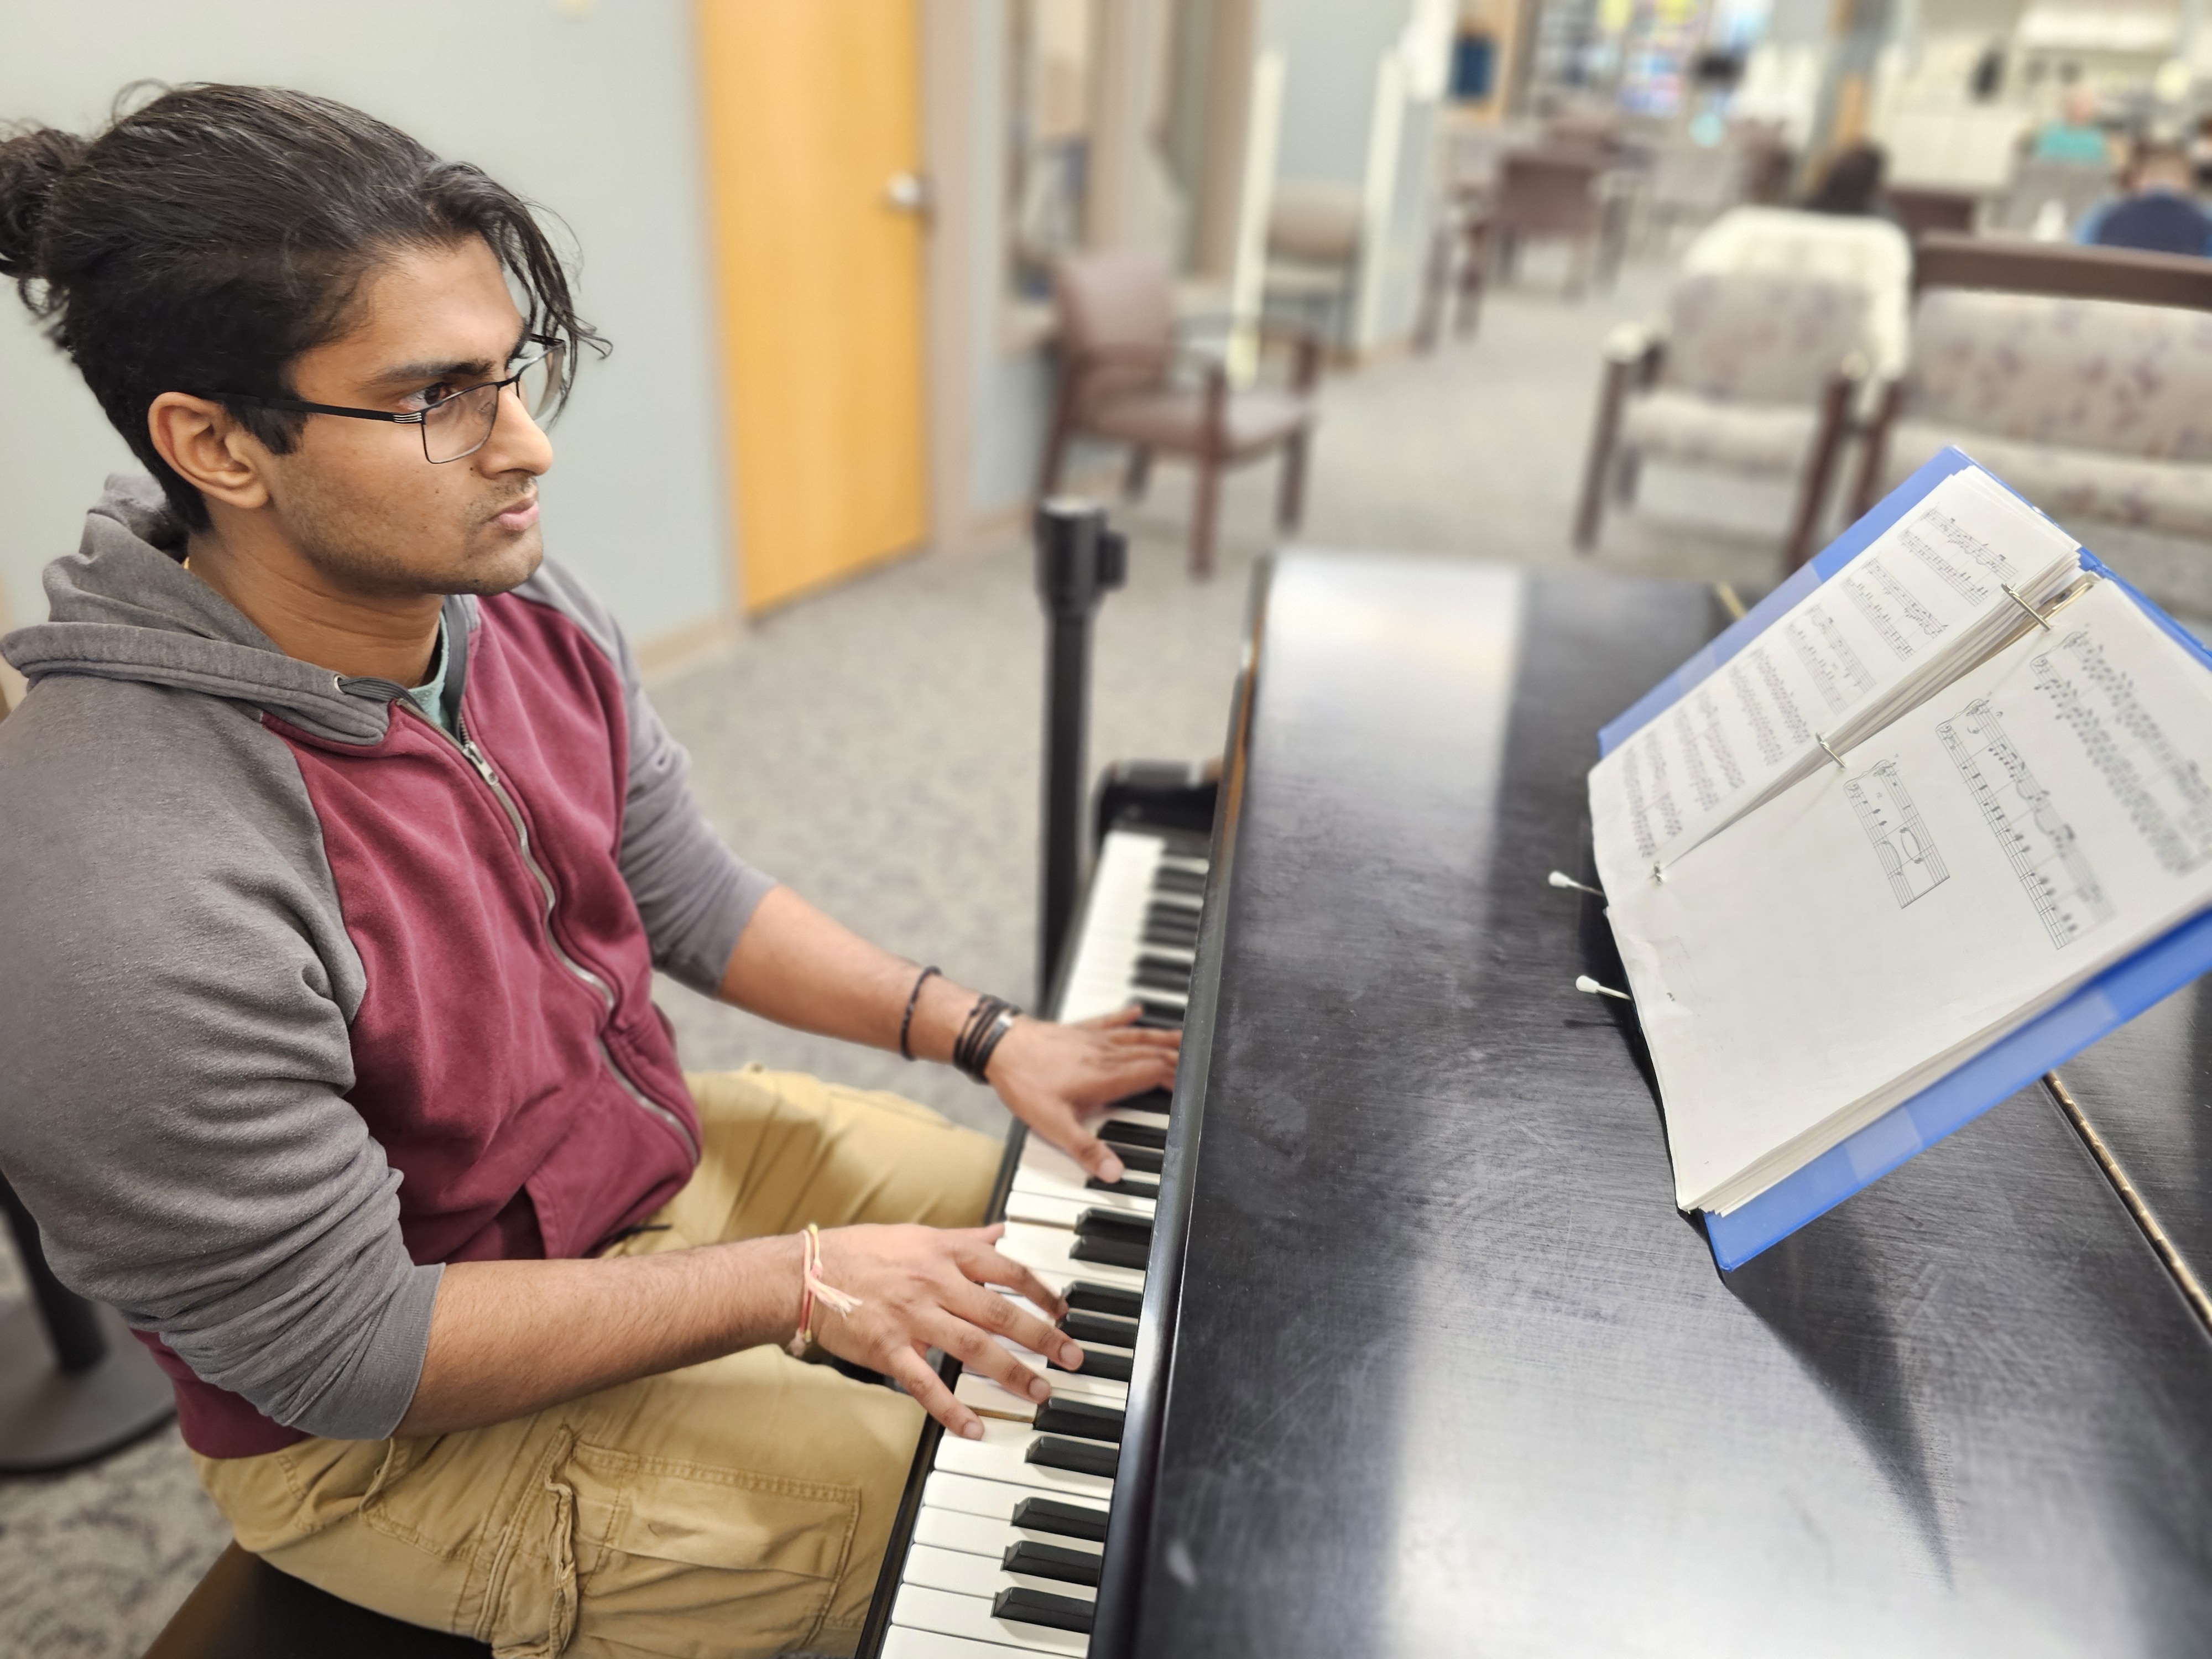 Warmed by music: Evening pianist greets team members, visitors at BroMenn